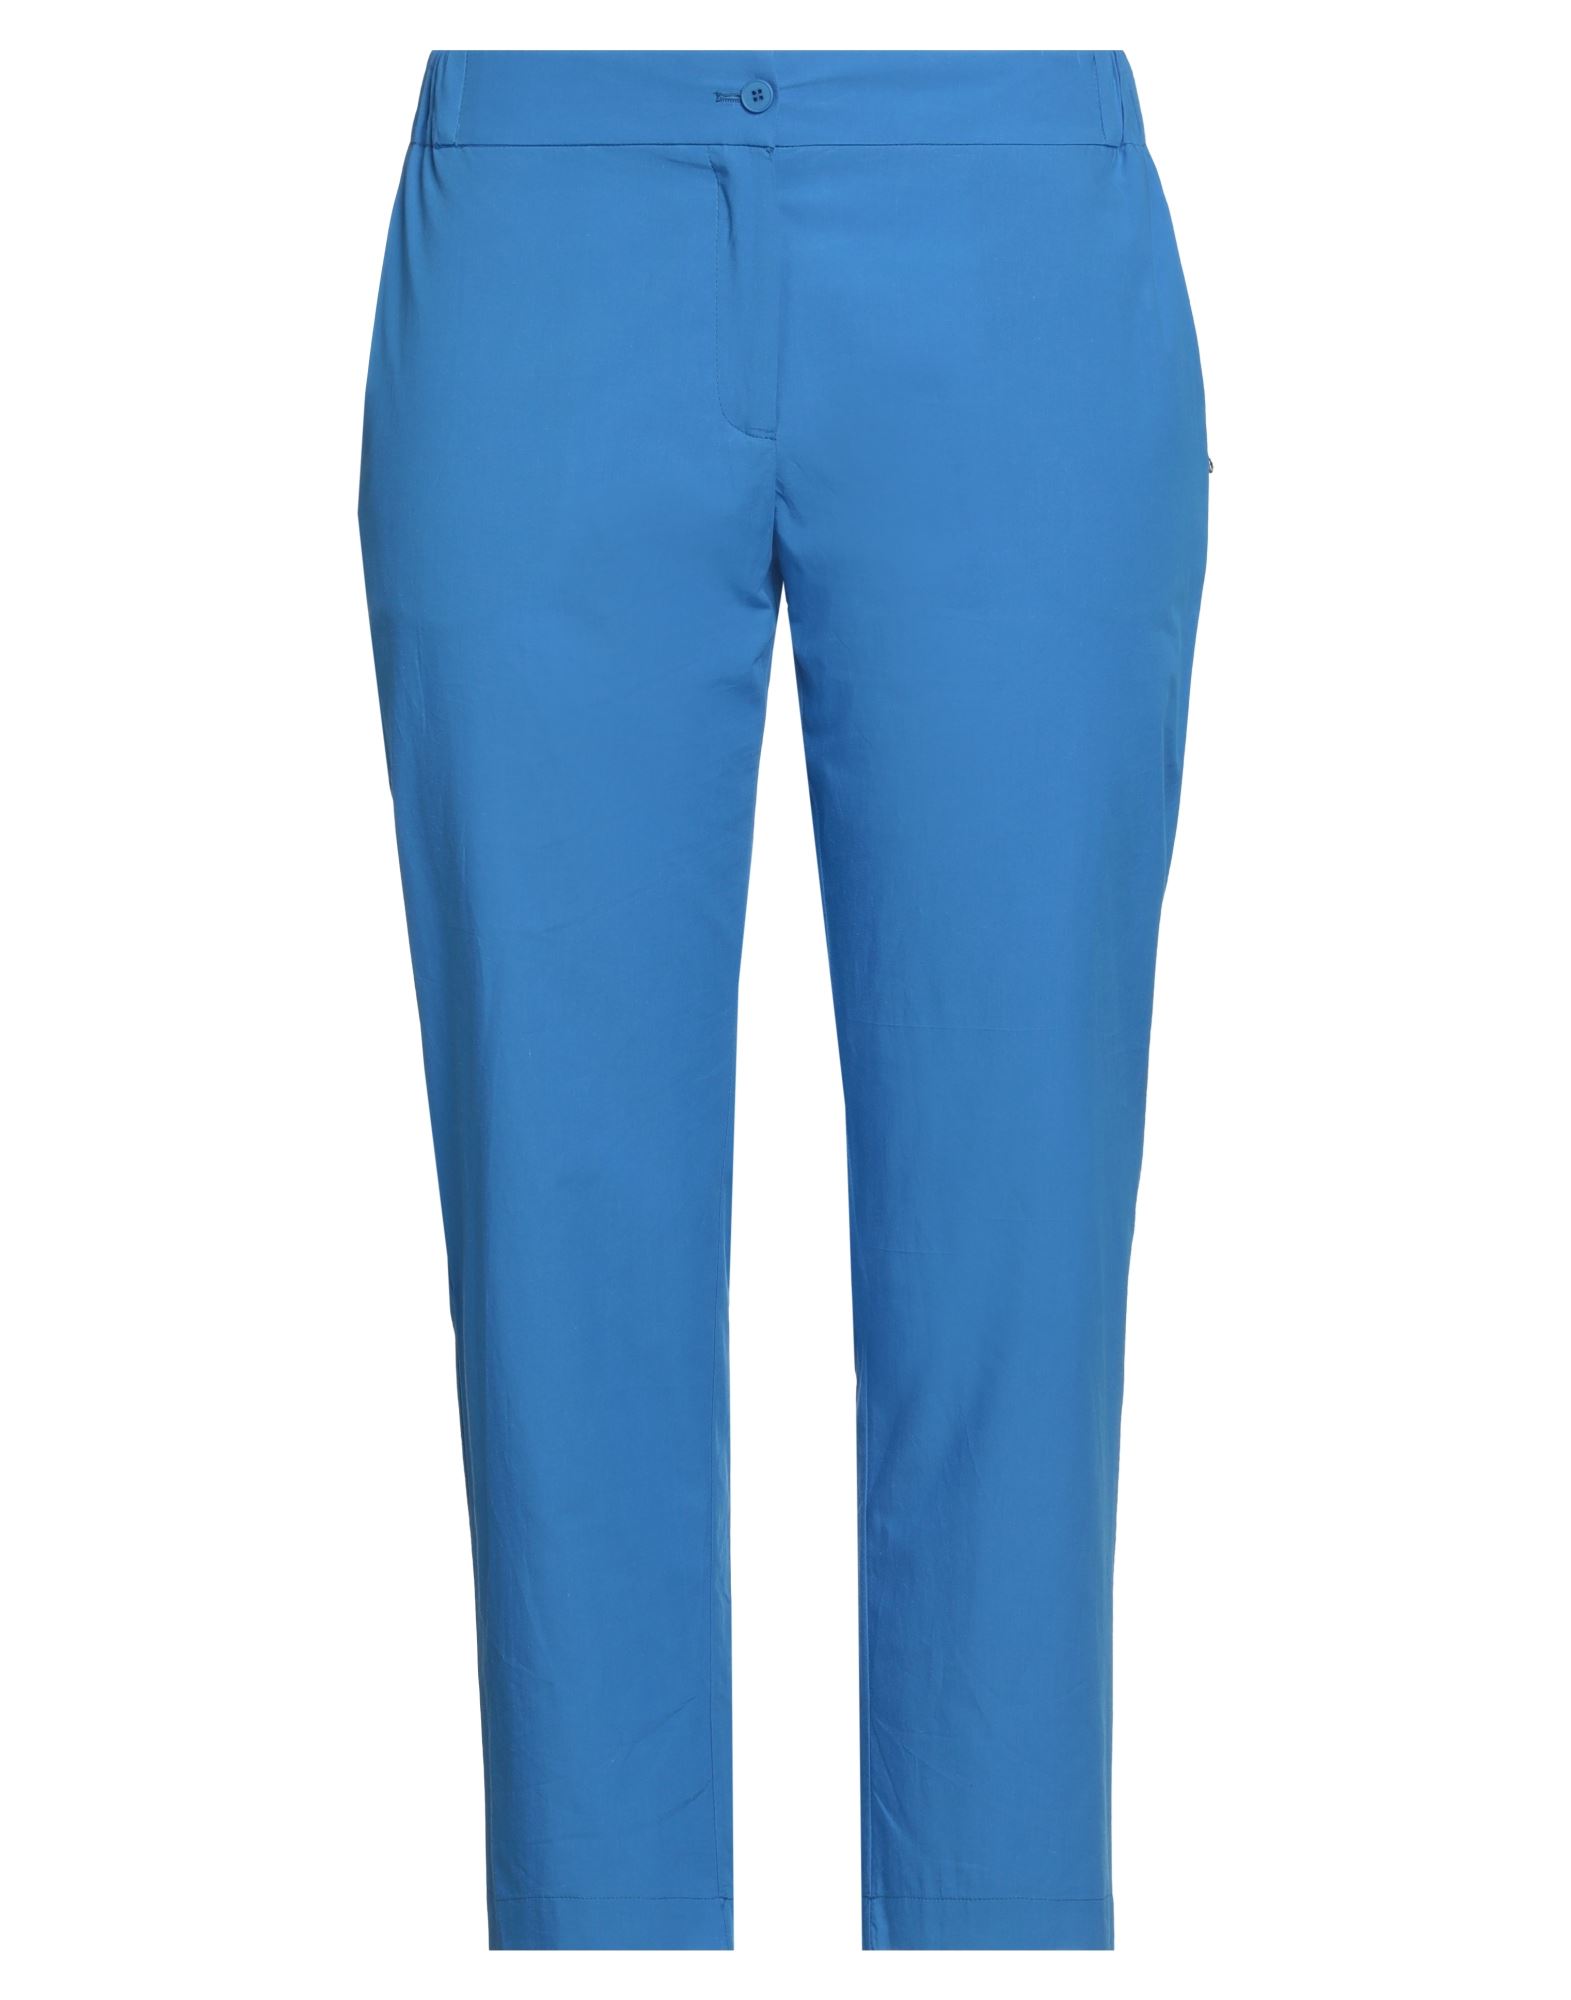 Ottod'ame Woman Pants Light Blue Size 8 Cotton In Bright Blue